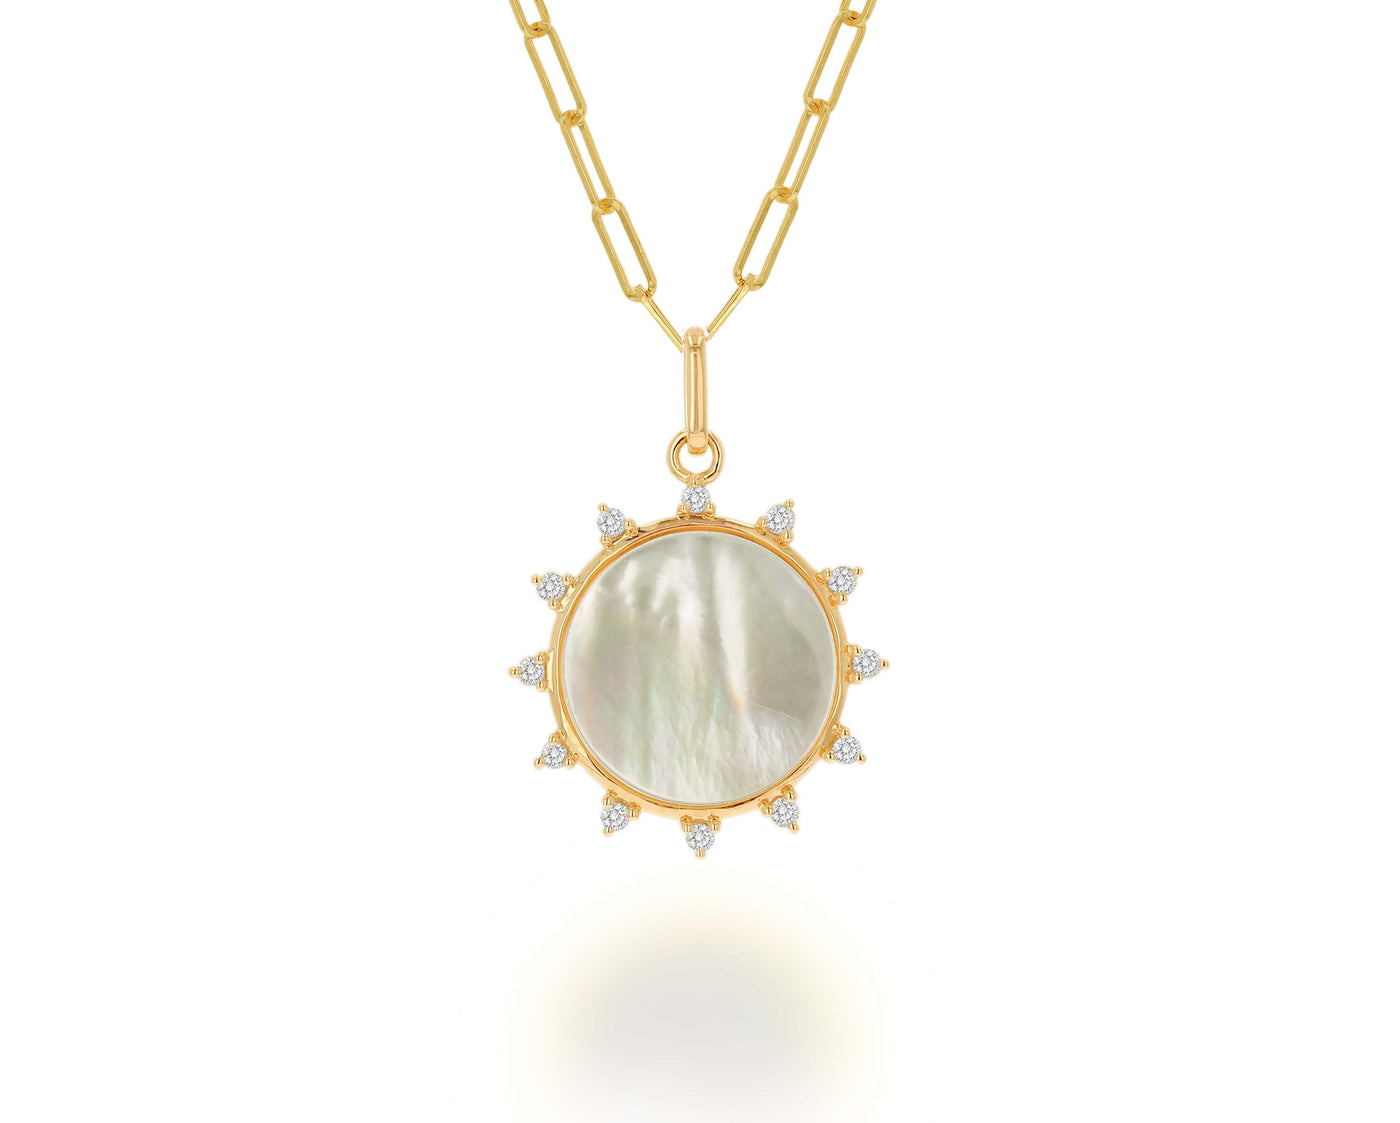 14K Gold Diamond and Mother of Pearl Sunshine Charm